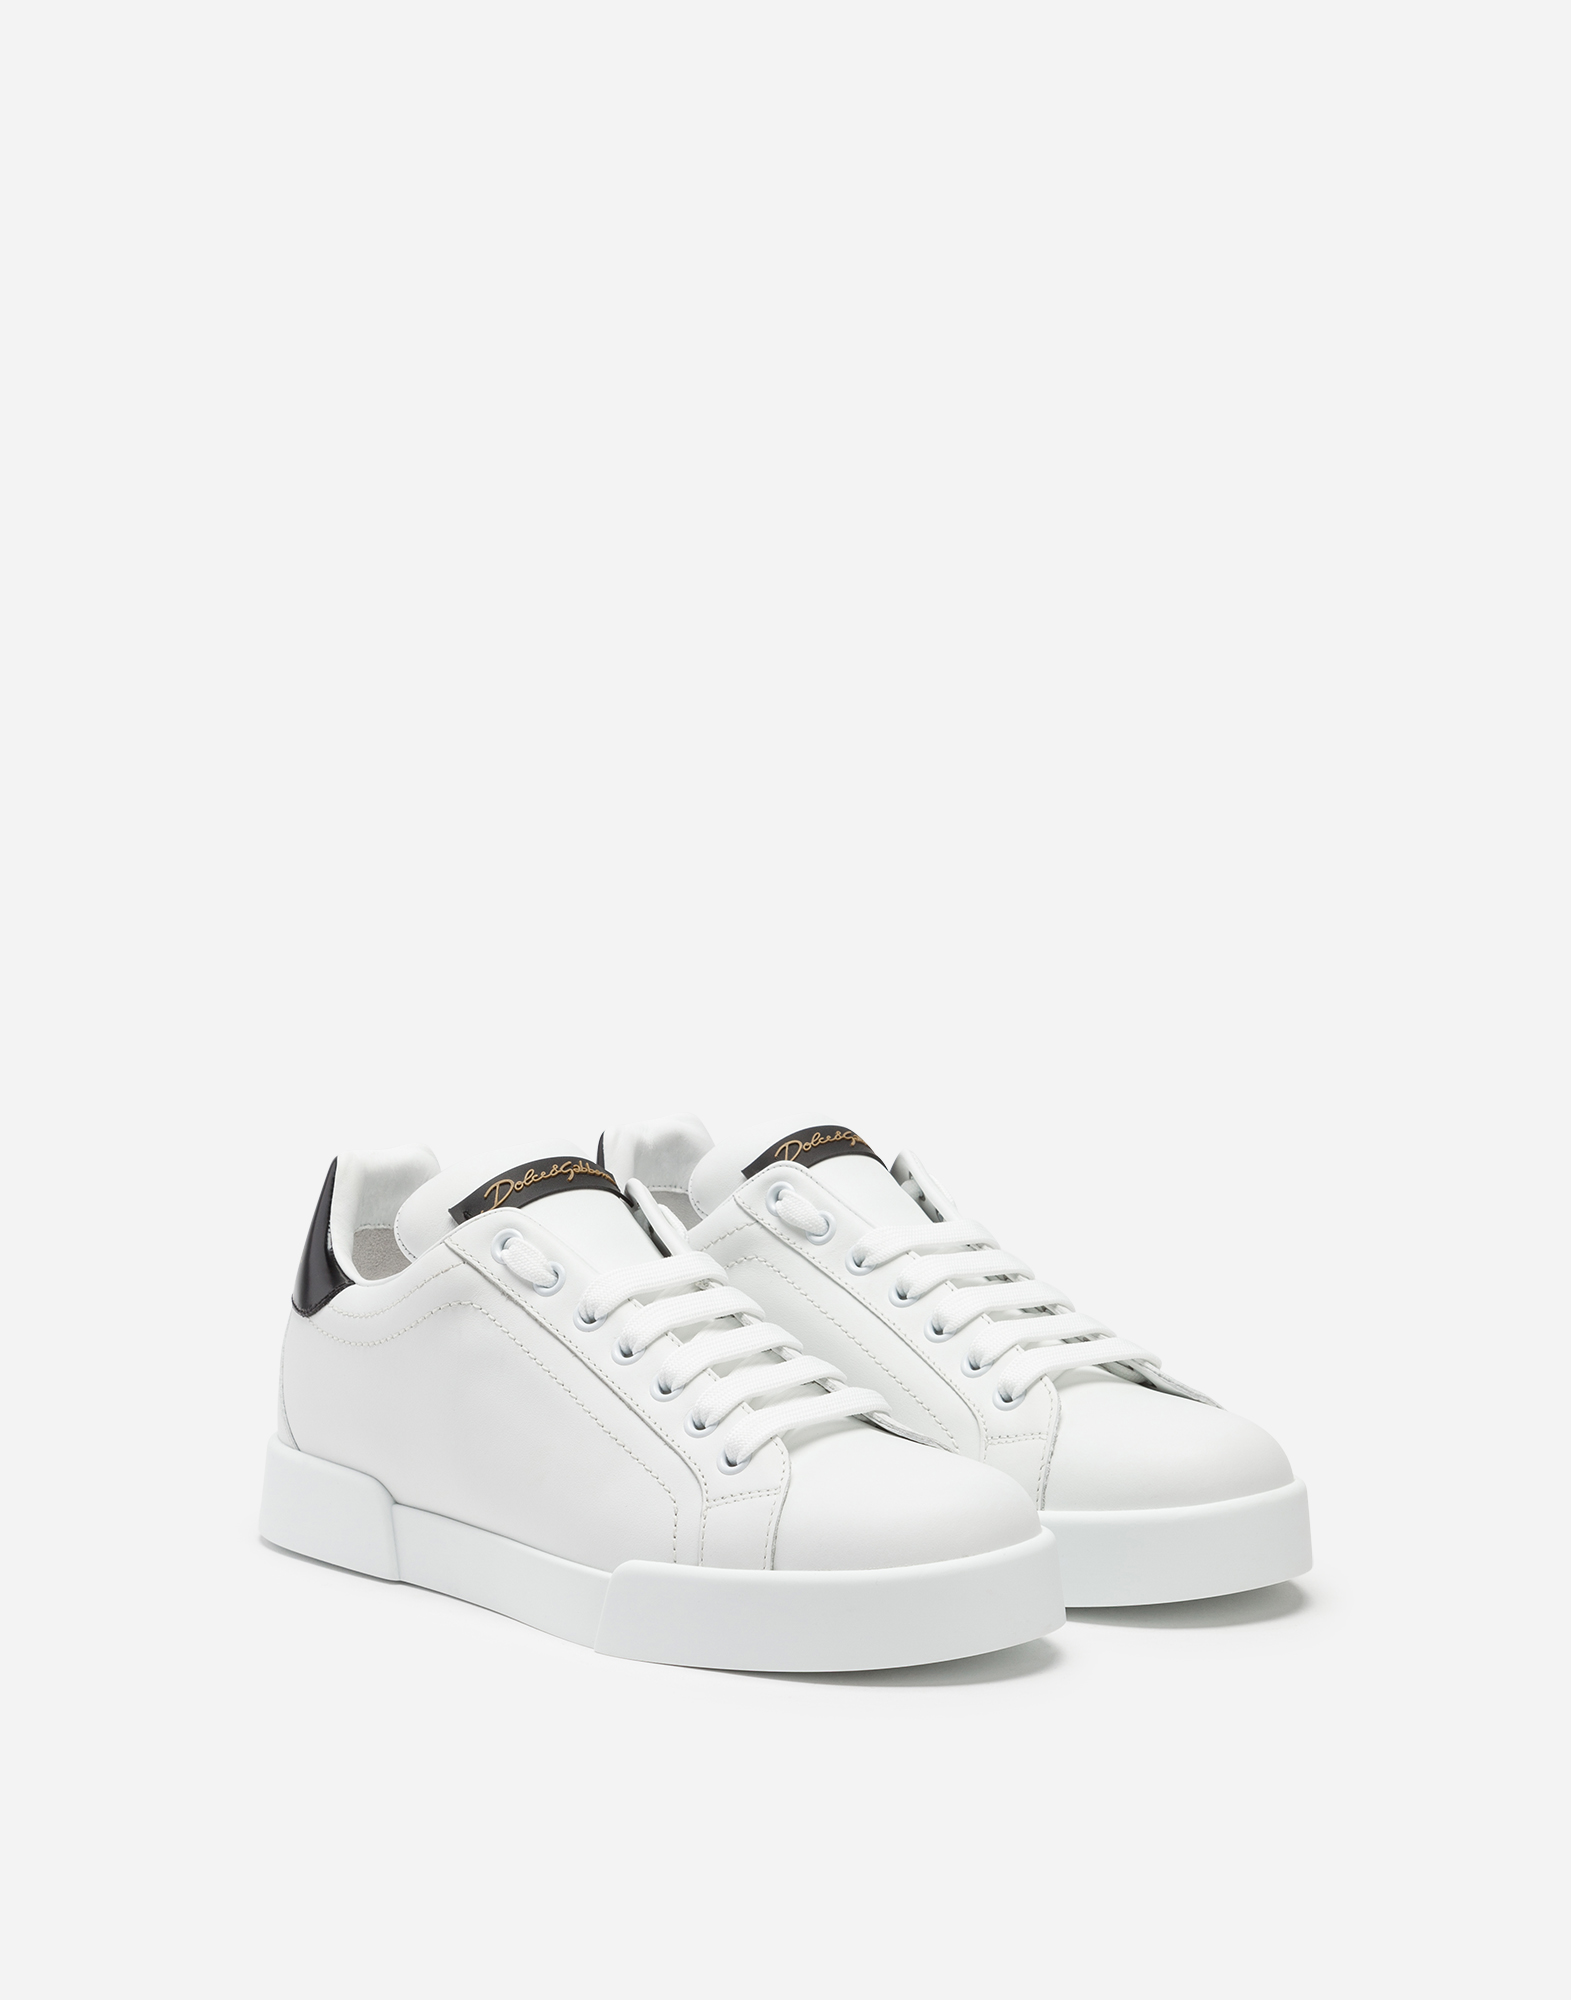 dolce and gabbana sneakers mens